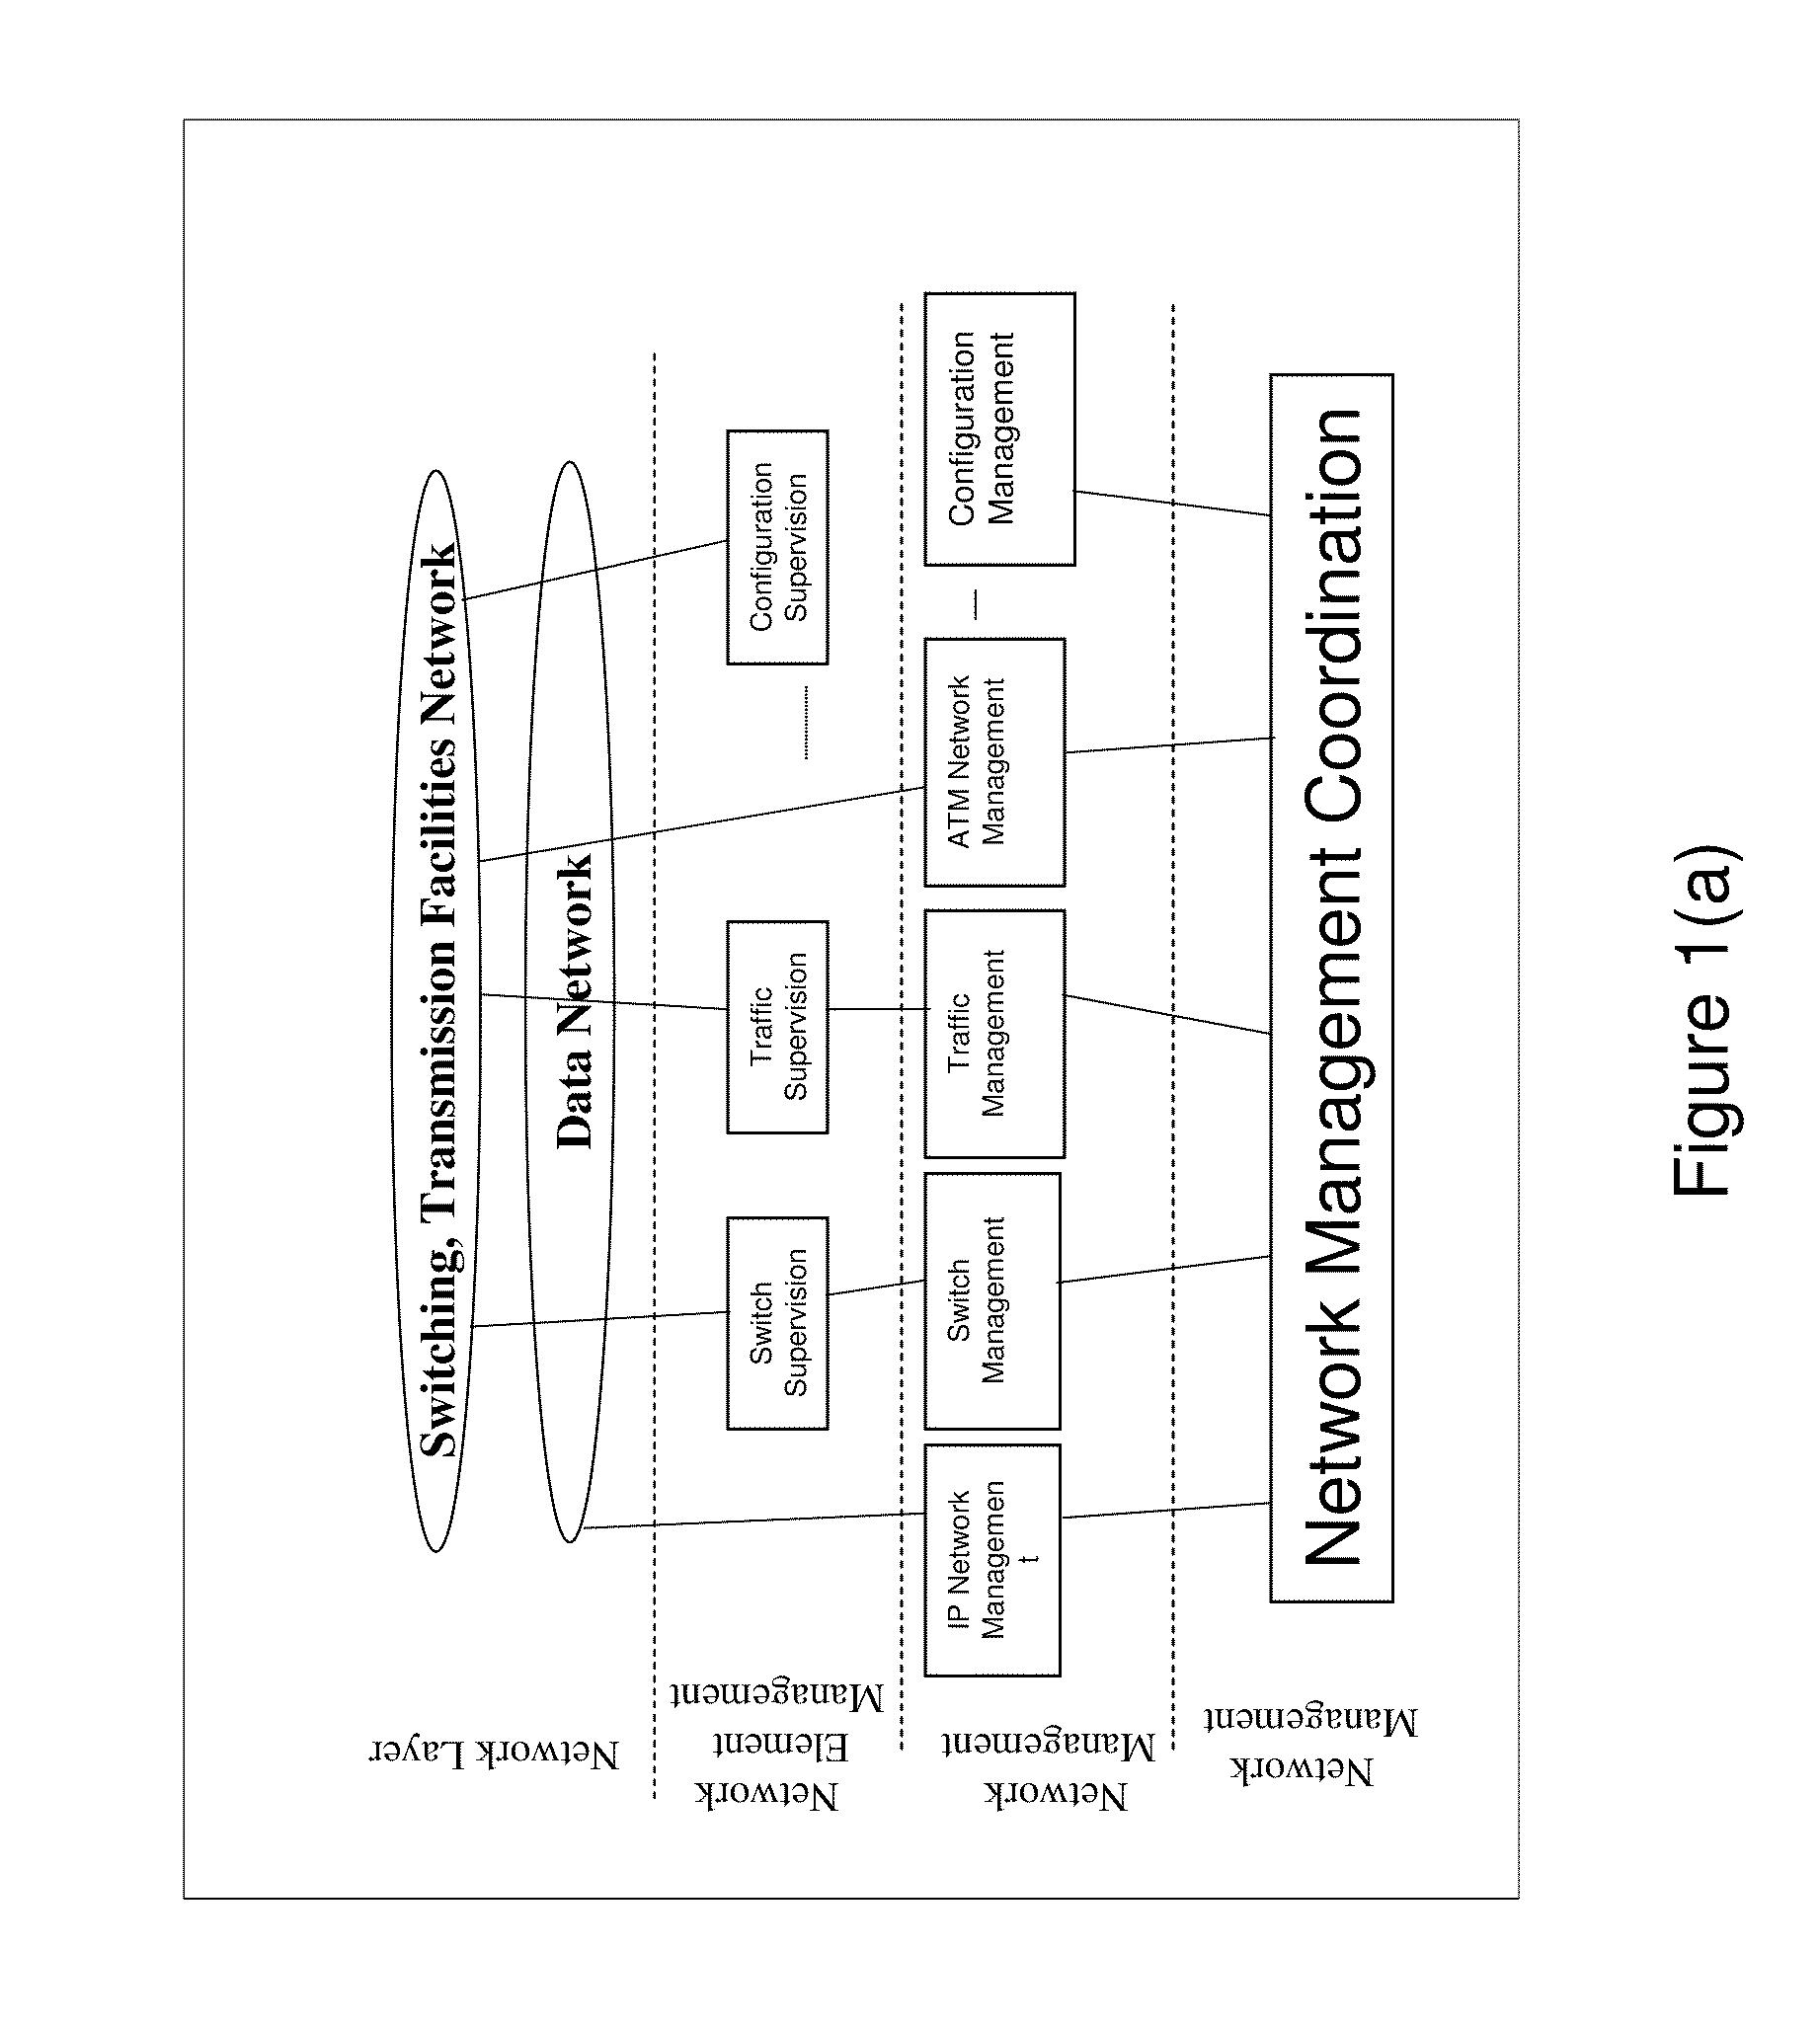 Apparatus and methods for real-time multimedia network traffic management & control in wireless networks